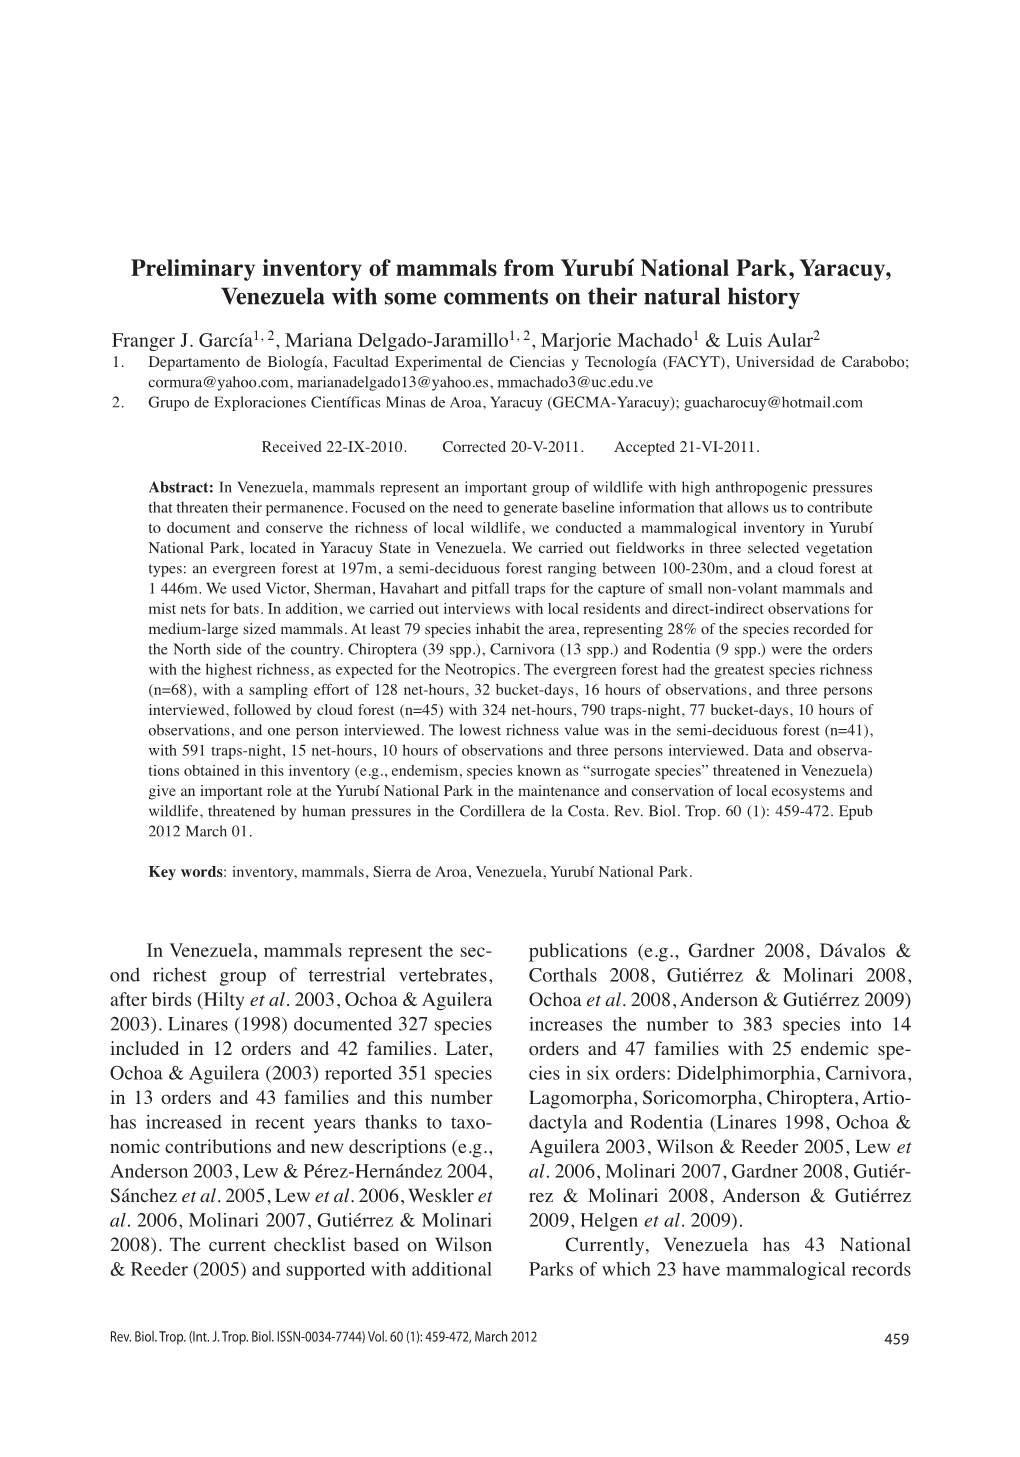 Preliminary Inventory of Mammals from Yurubí National Park, Yaracuy, Venezuela with Some Comments on Their Natural History